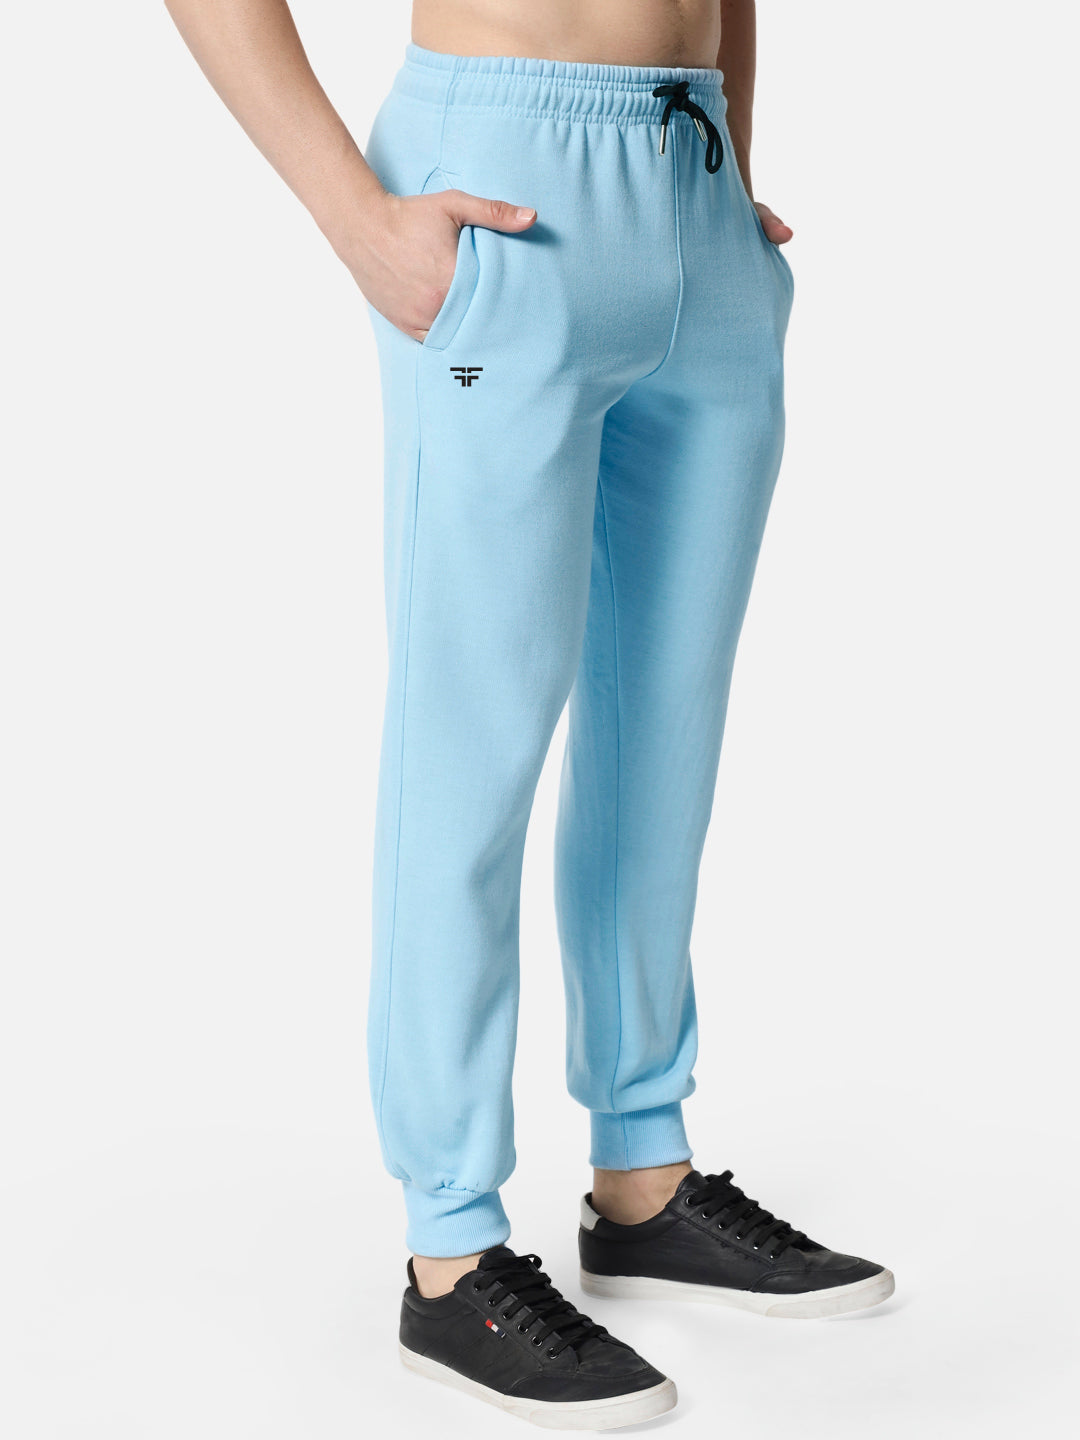 Turquoise Thermal Co-ord Set (Hoodie and Jogger Combo)